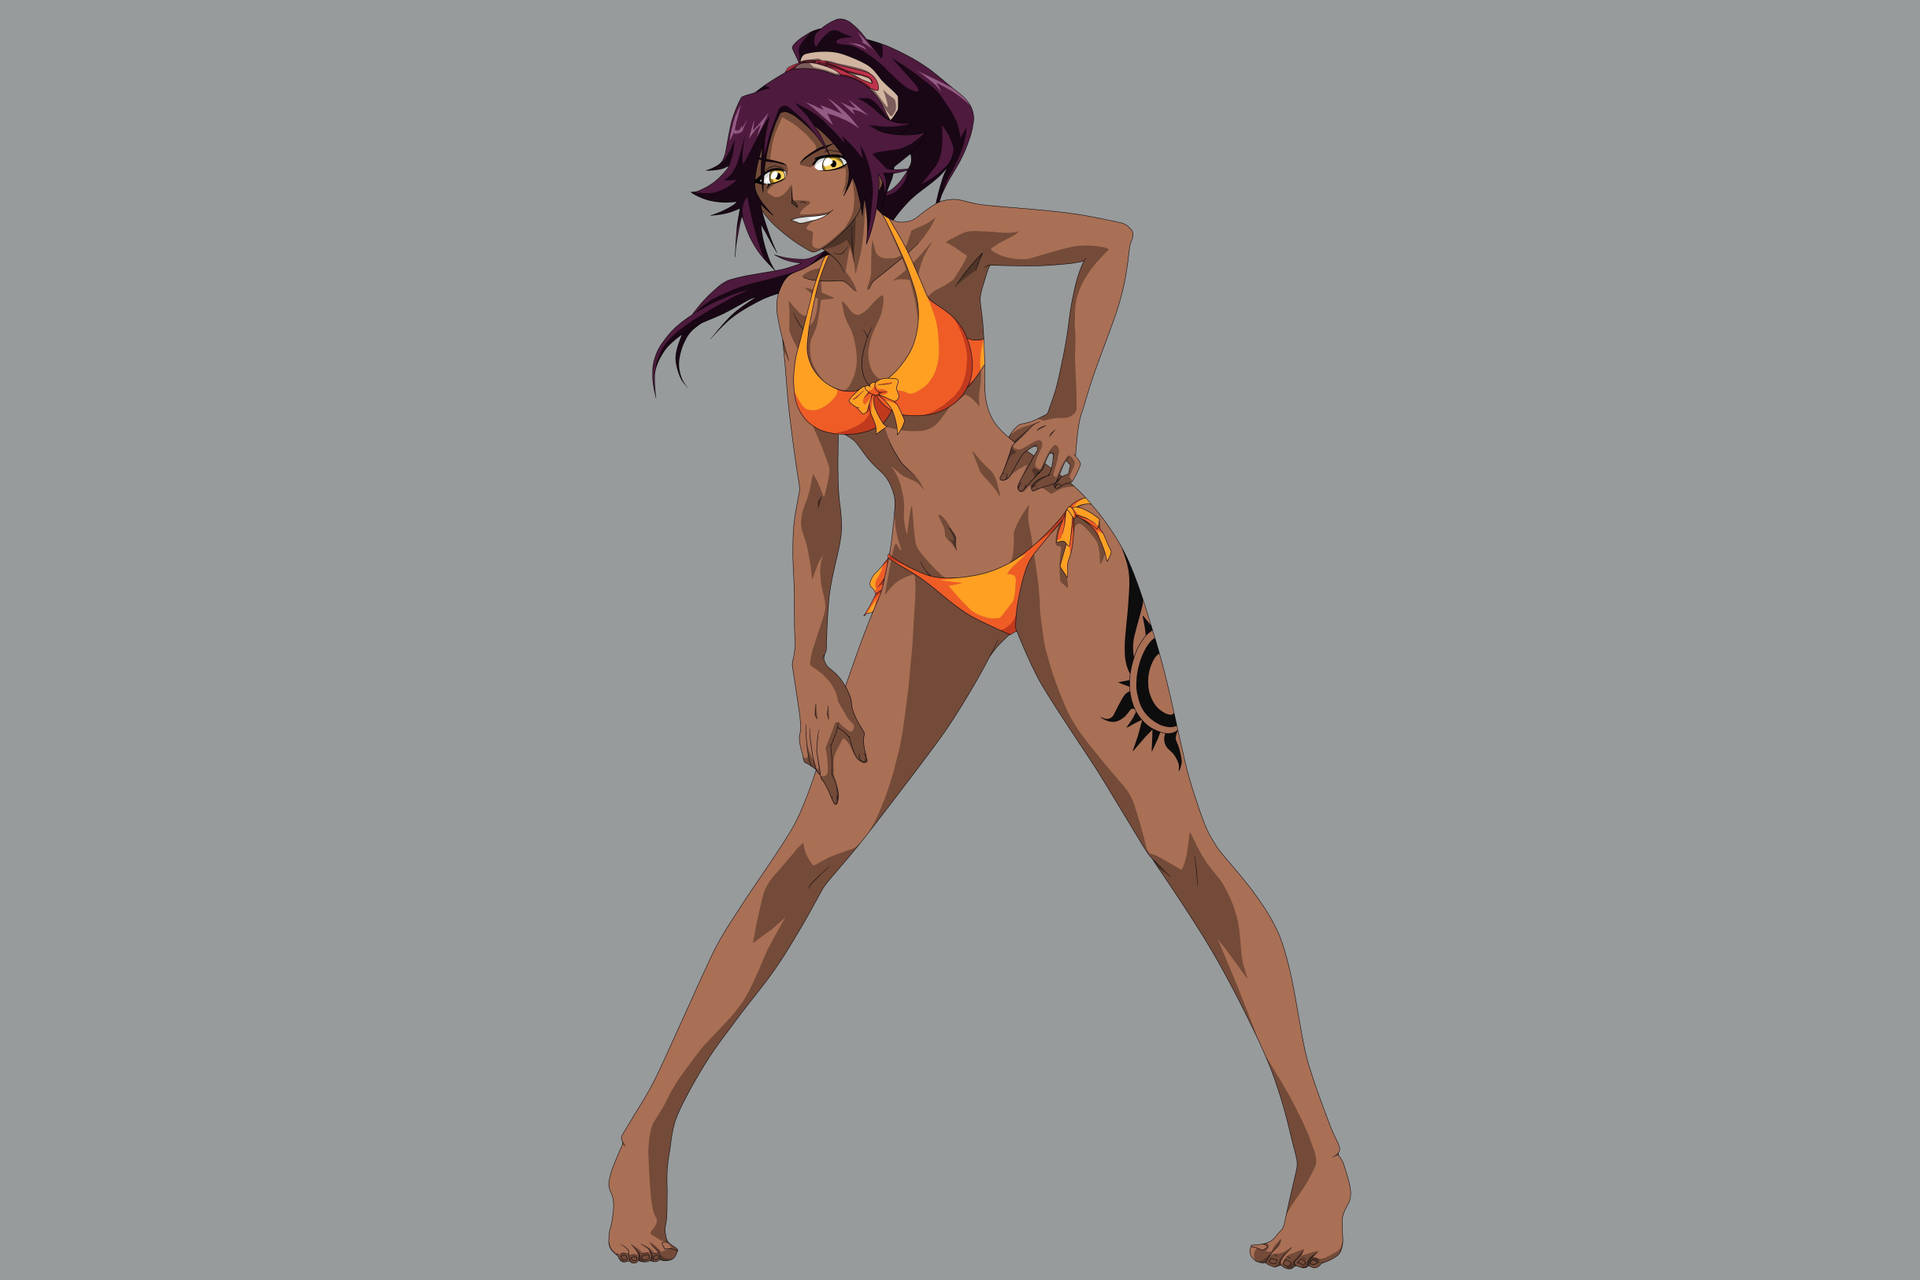 Caption: Yoruichi Shihouin in Swimwear - Revealing the Power and Beauty of Stealth Wallpaper